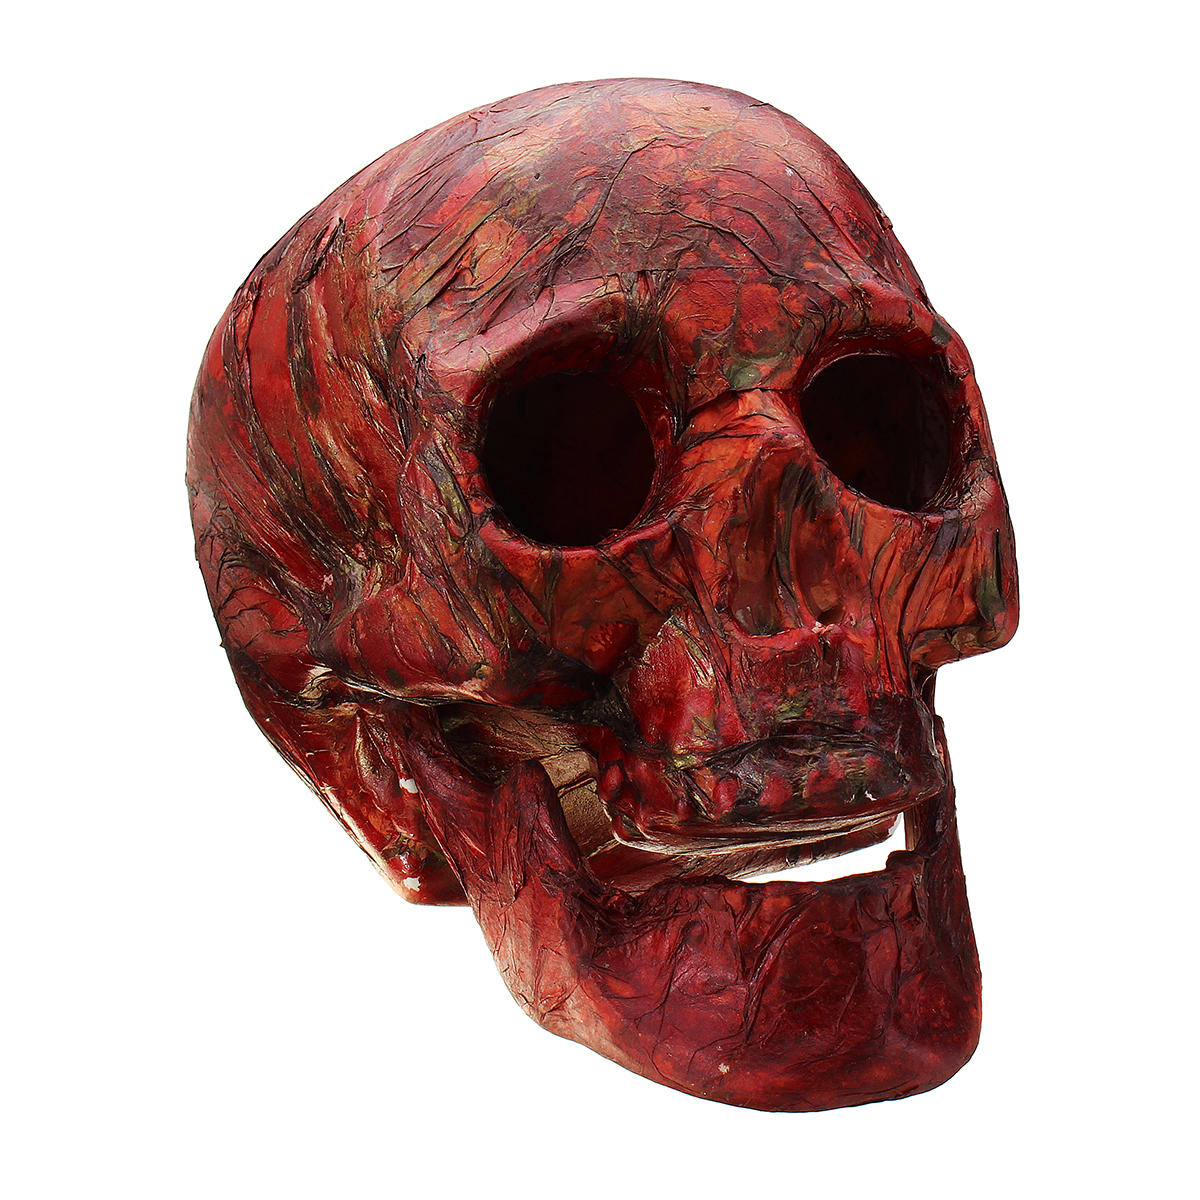 

Halloween Human Skeleton Head Horror Scary Gothic Skull Prop Home Party Decorations